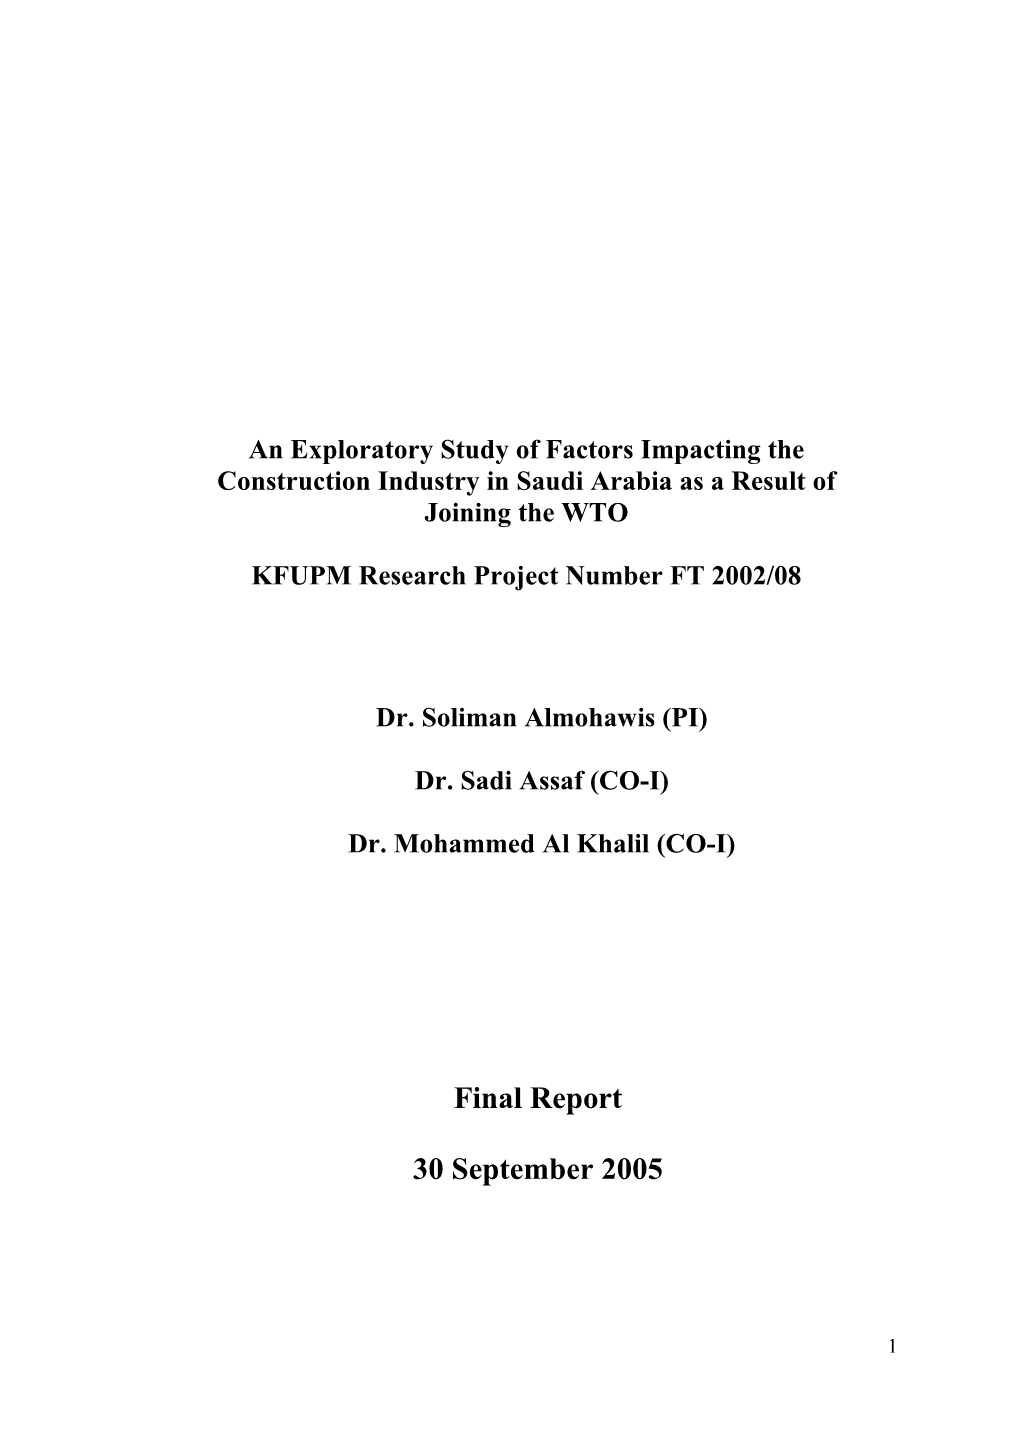 KFUPM Research Project Number FT 2002/08